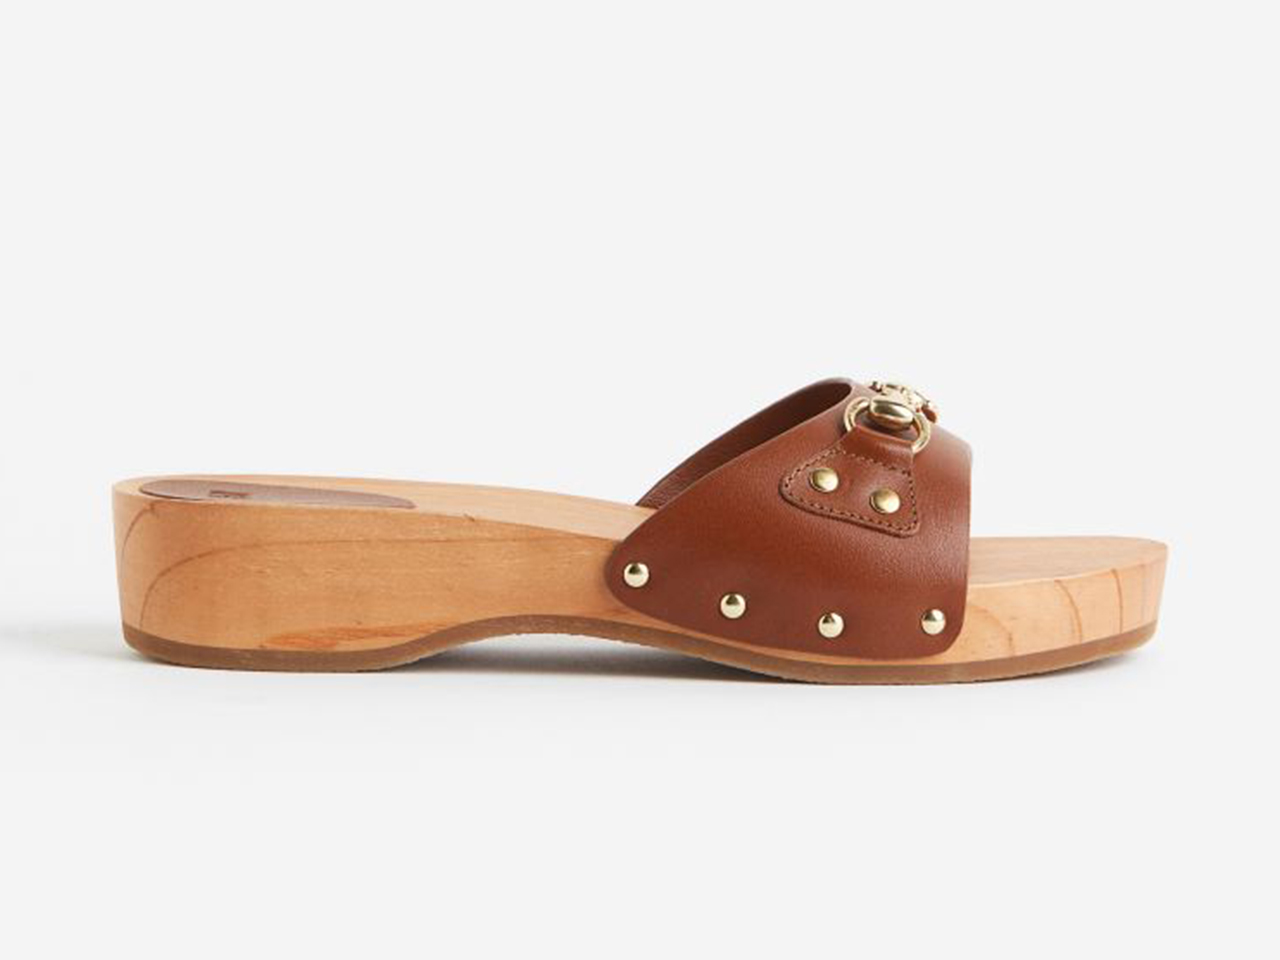 A side profile of a pair of flatform wood and leather clogs from H&M.